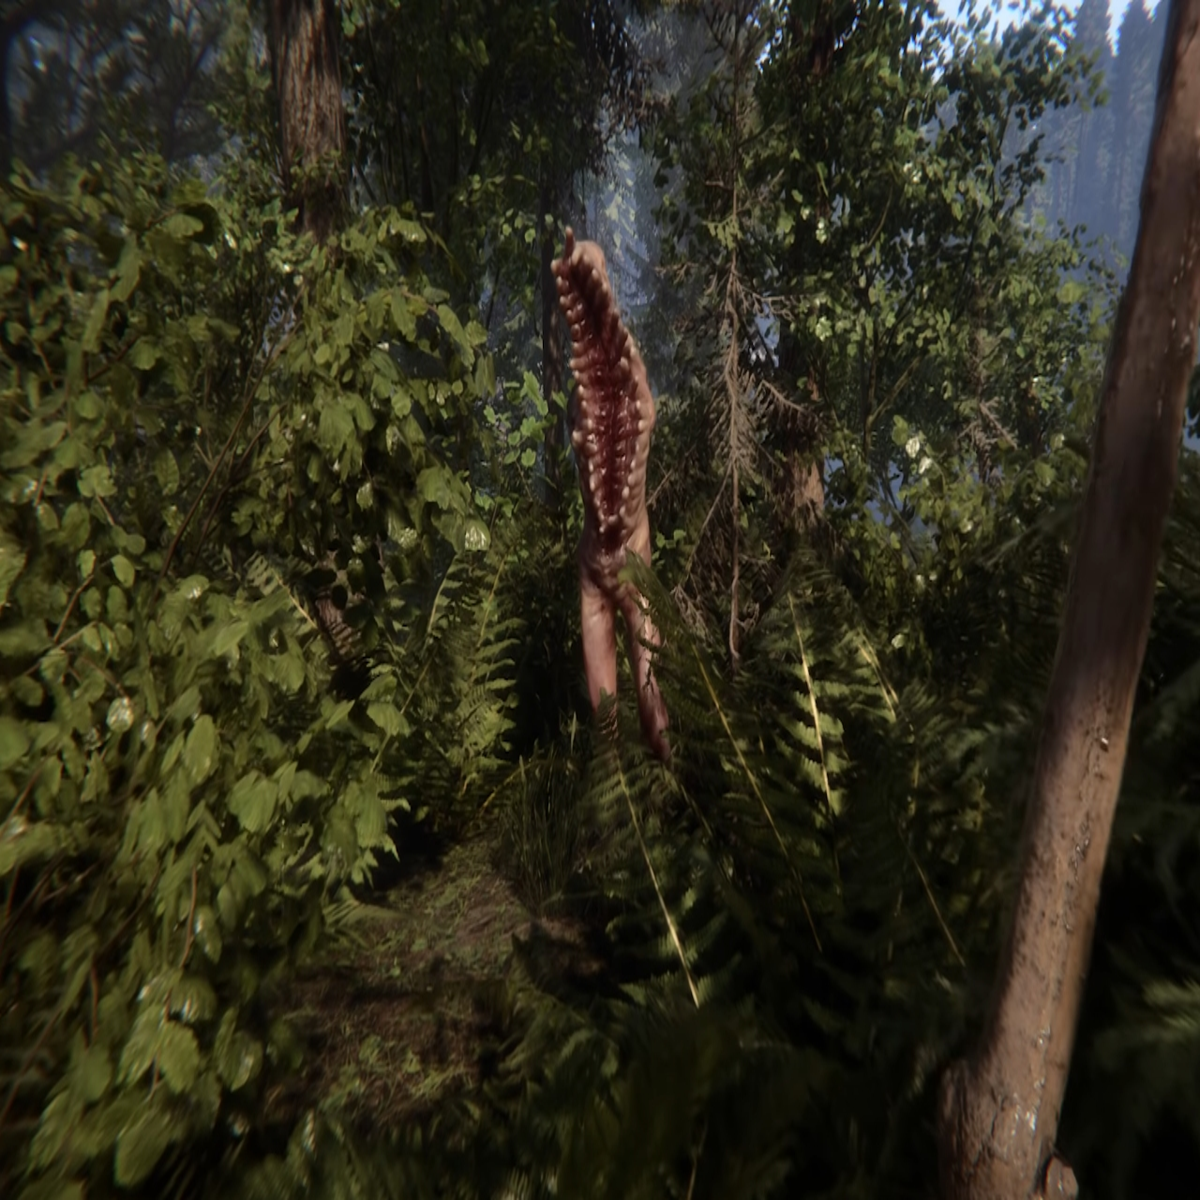 THESE NEW DETAILS IN THE FOREST ARE CRAZY! (SONS OF THE FOREST